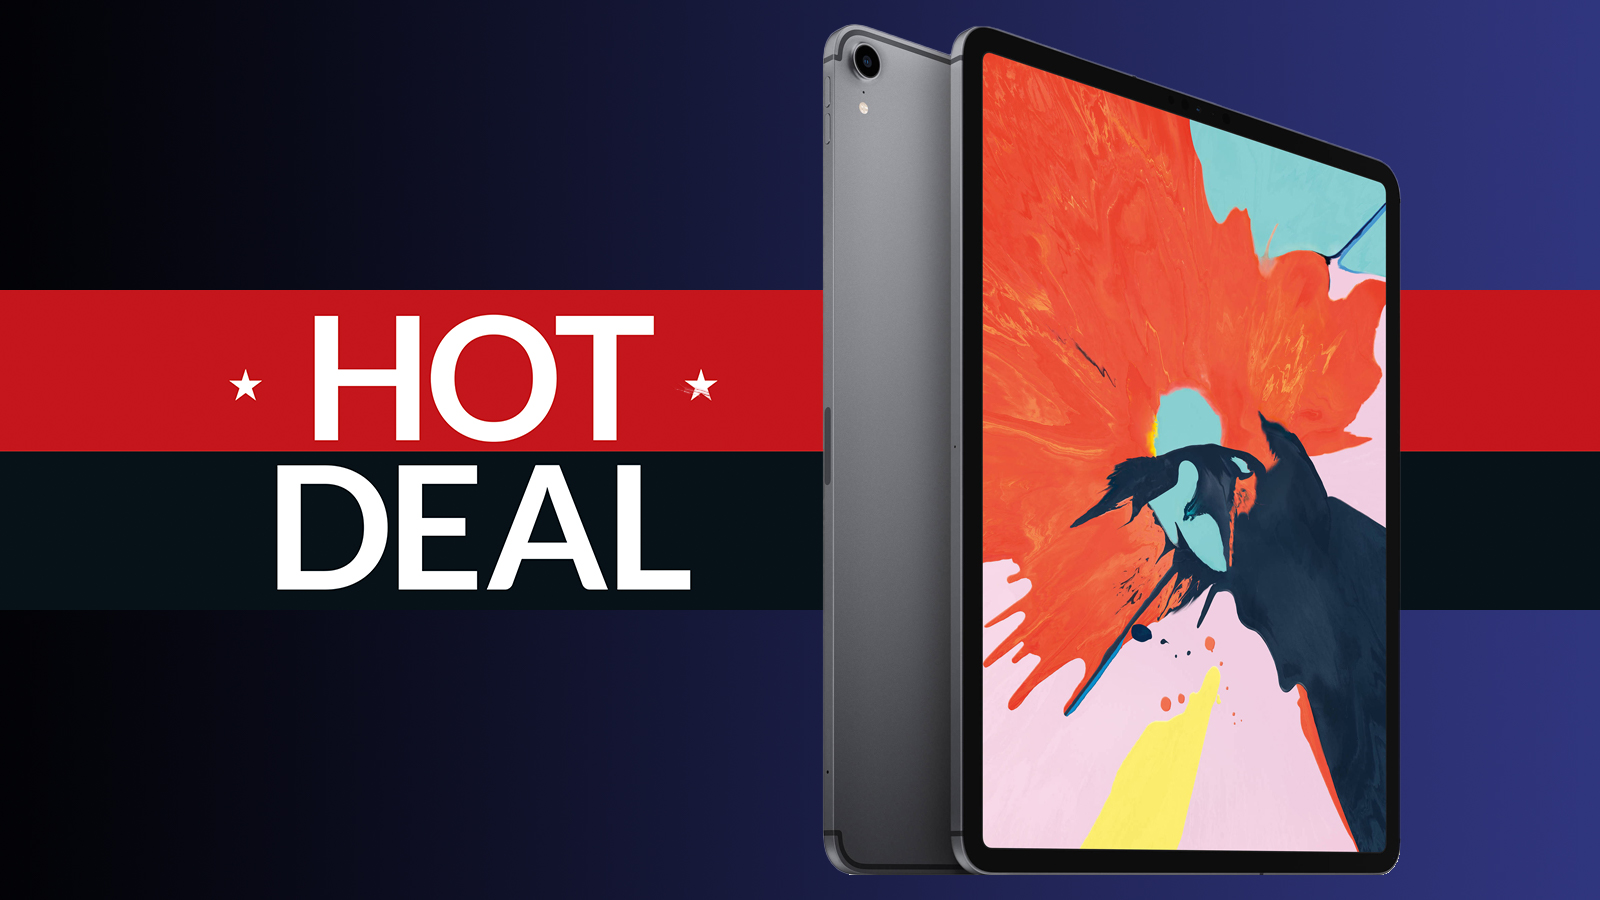 Best iPad Pro deals today take up to 400 off select iPads right now at